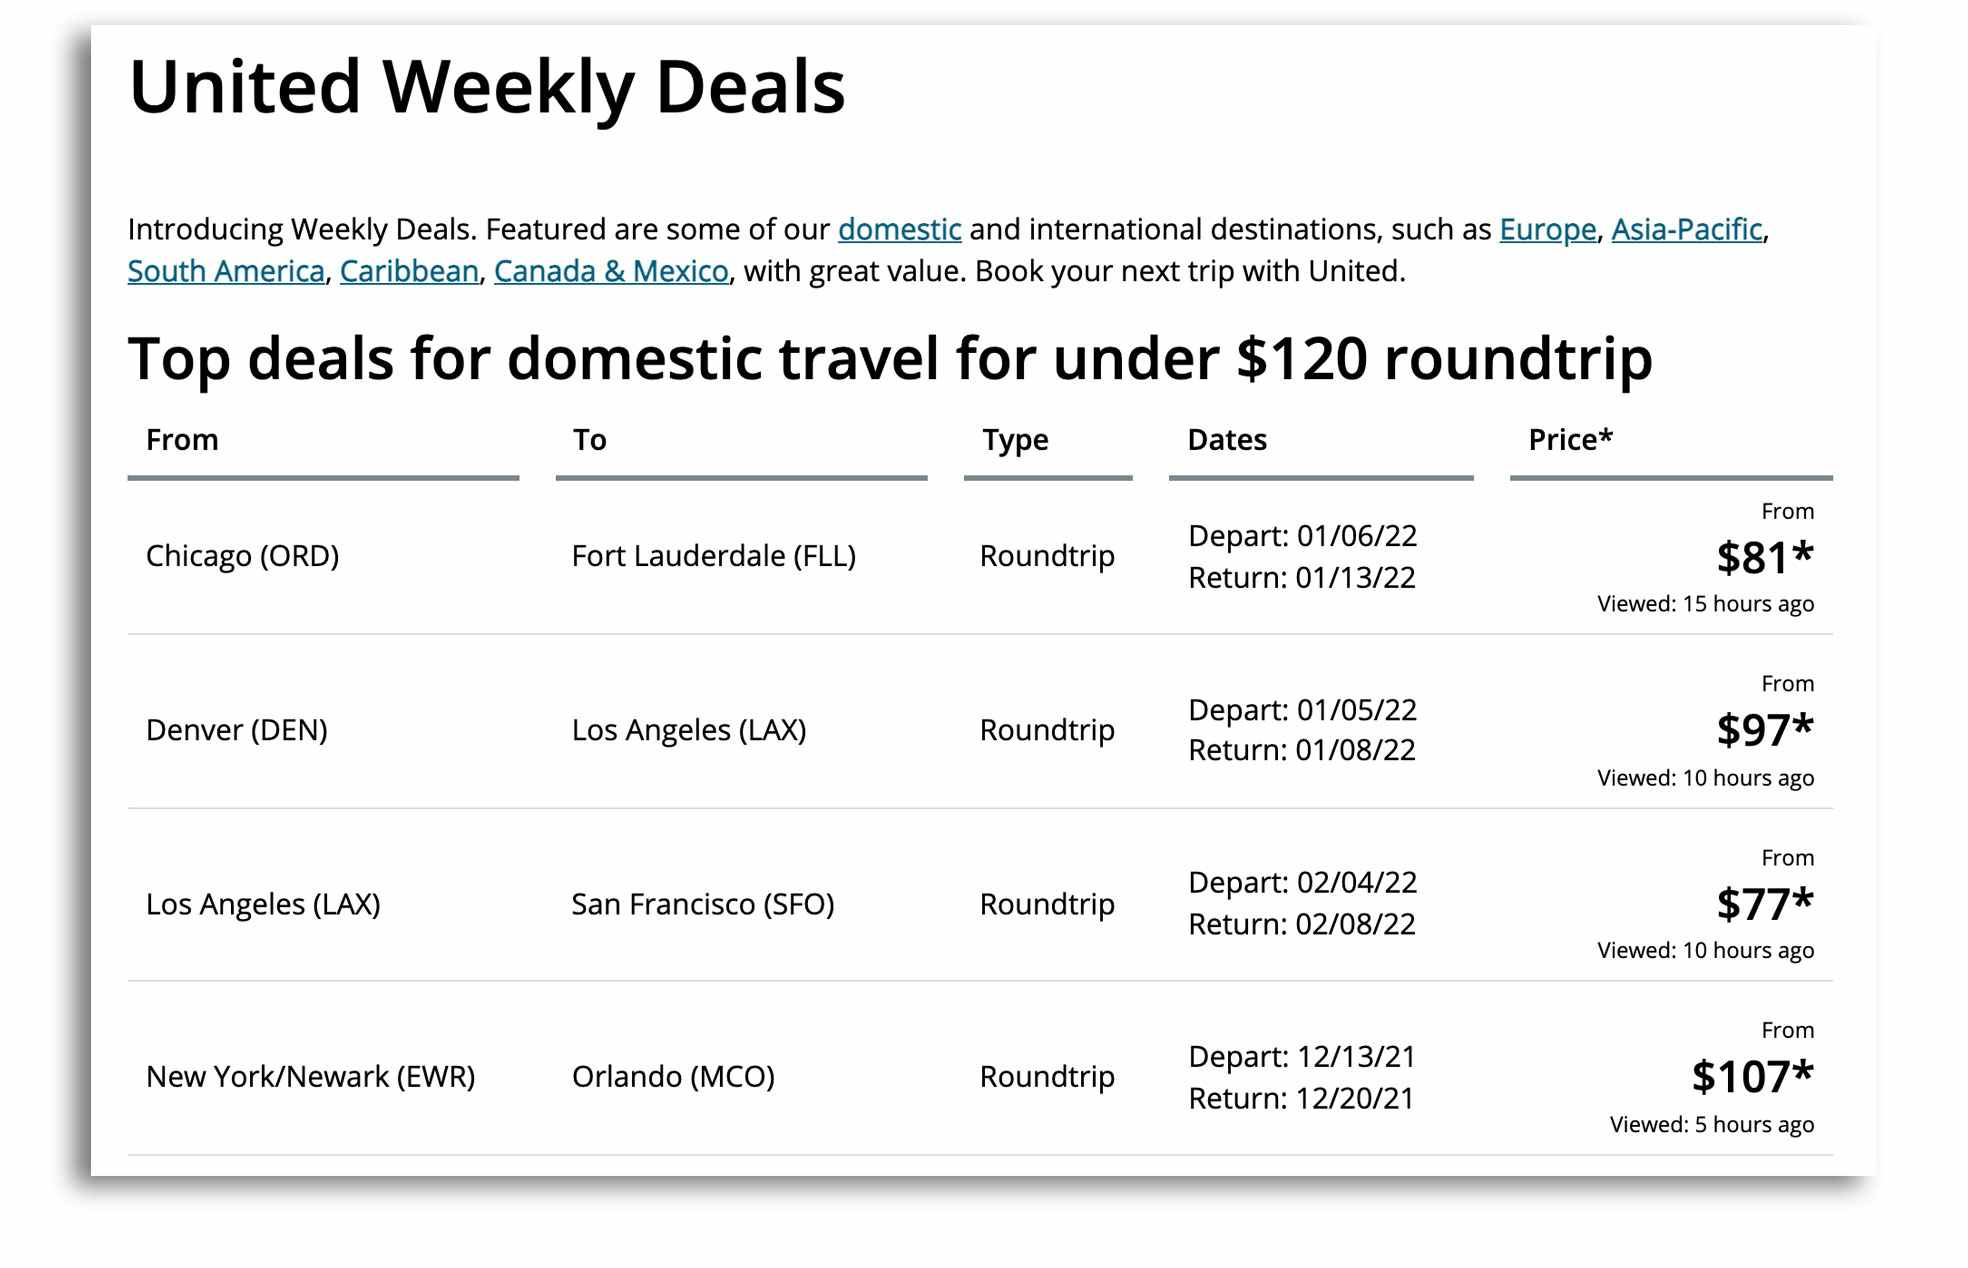 United Airlines weekly deals page